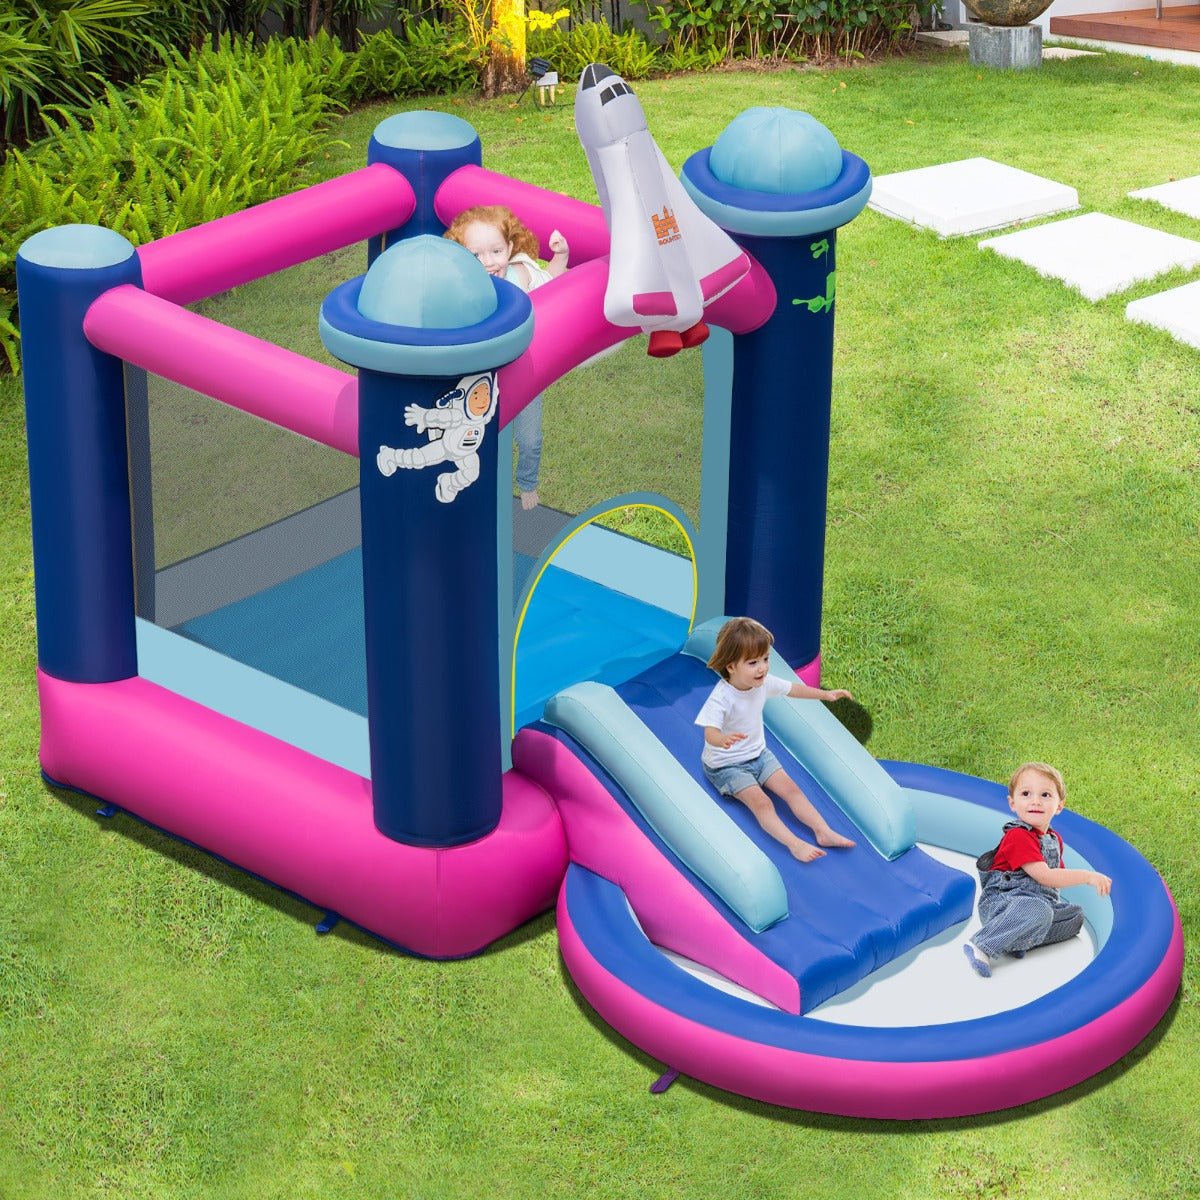 Inflatable Space Adventure with Jumping Area & Slide - Play Among the Stars